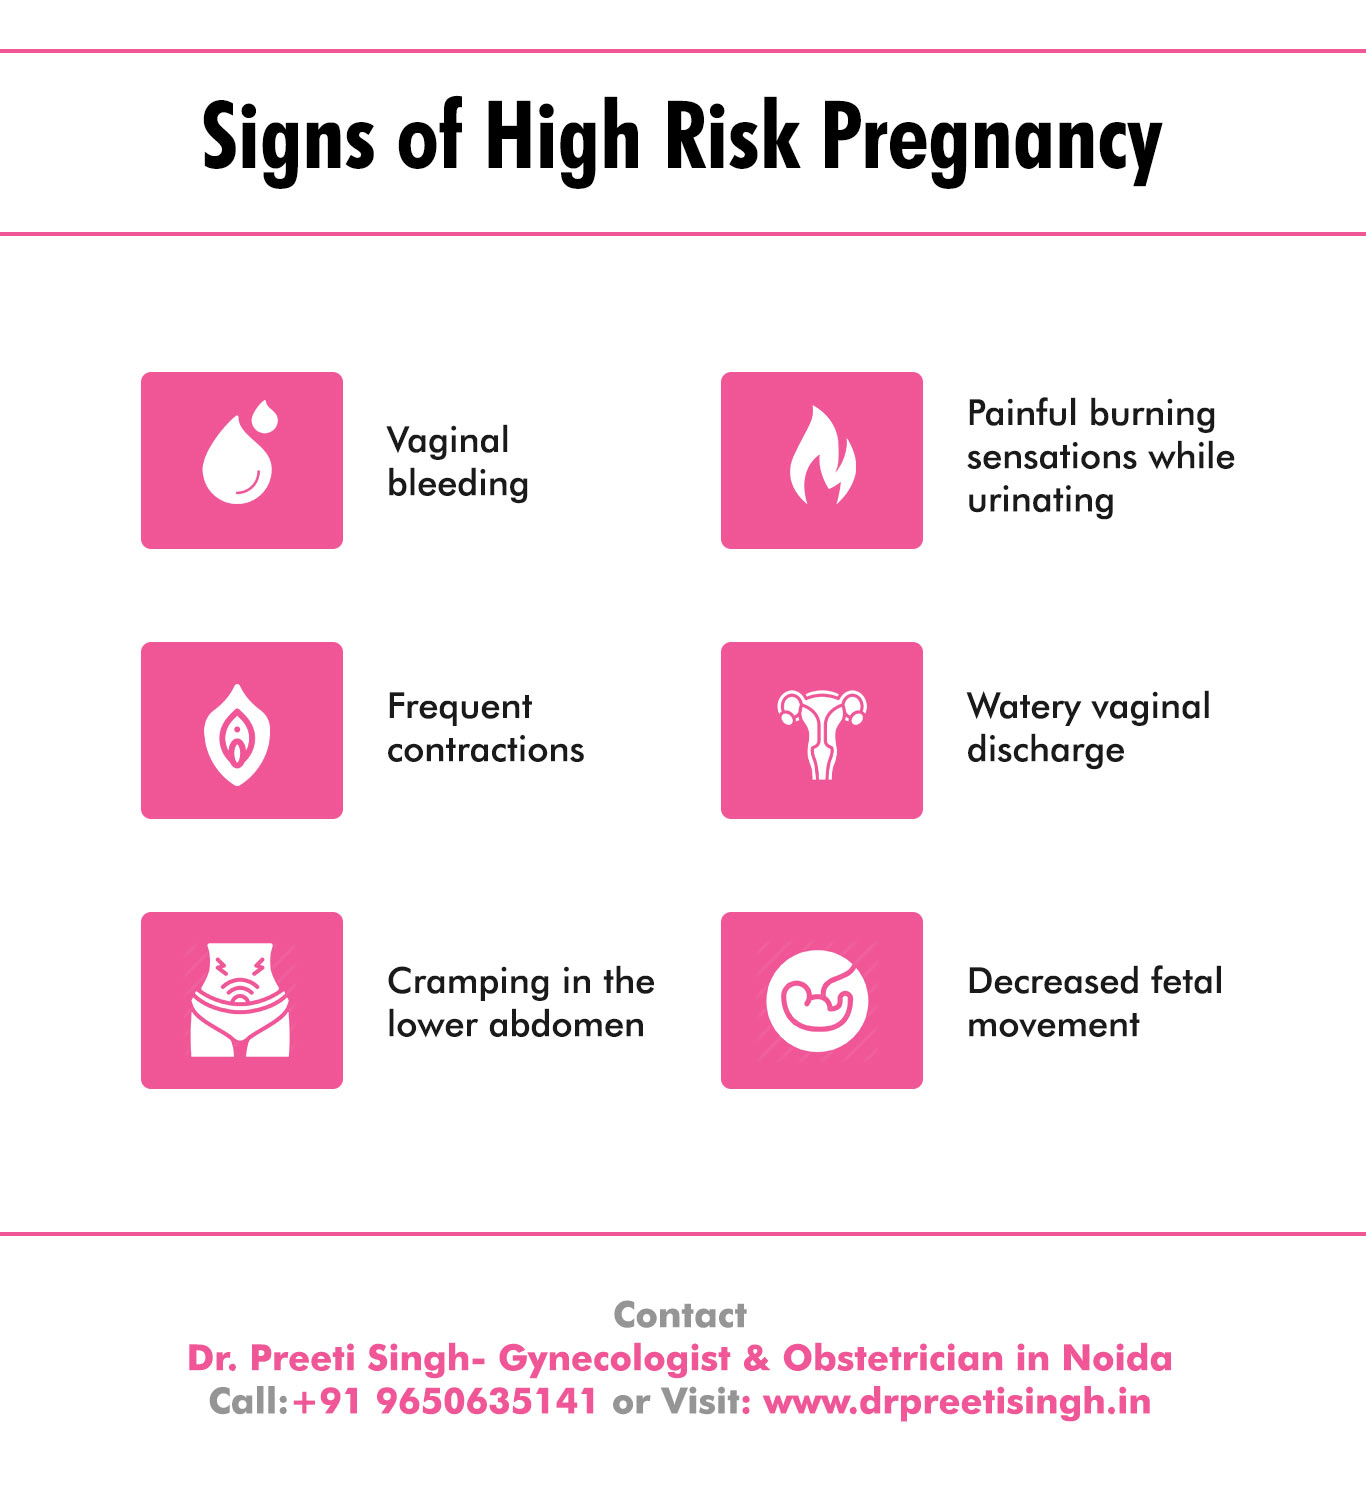 Signs of high-risk pregnancy